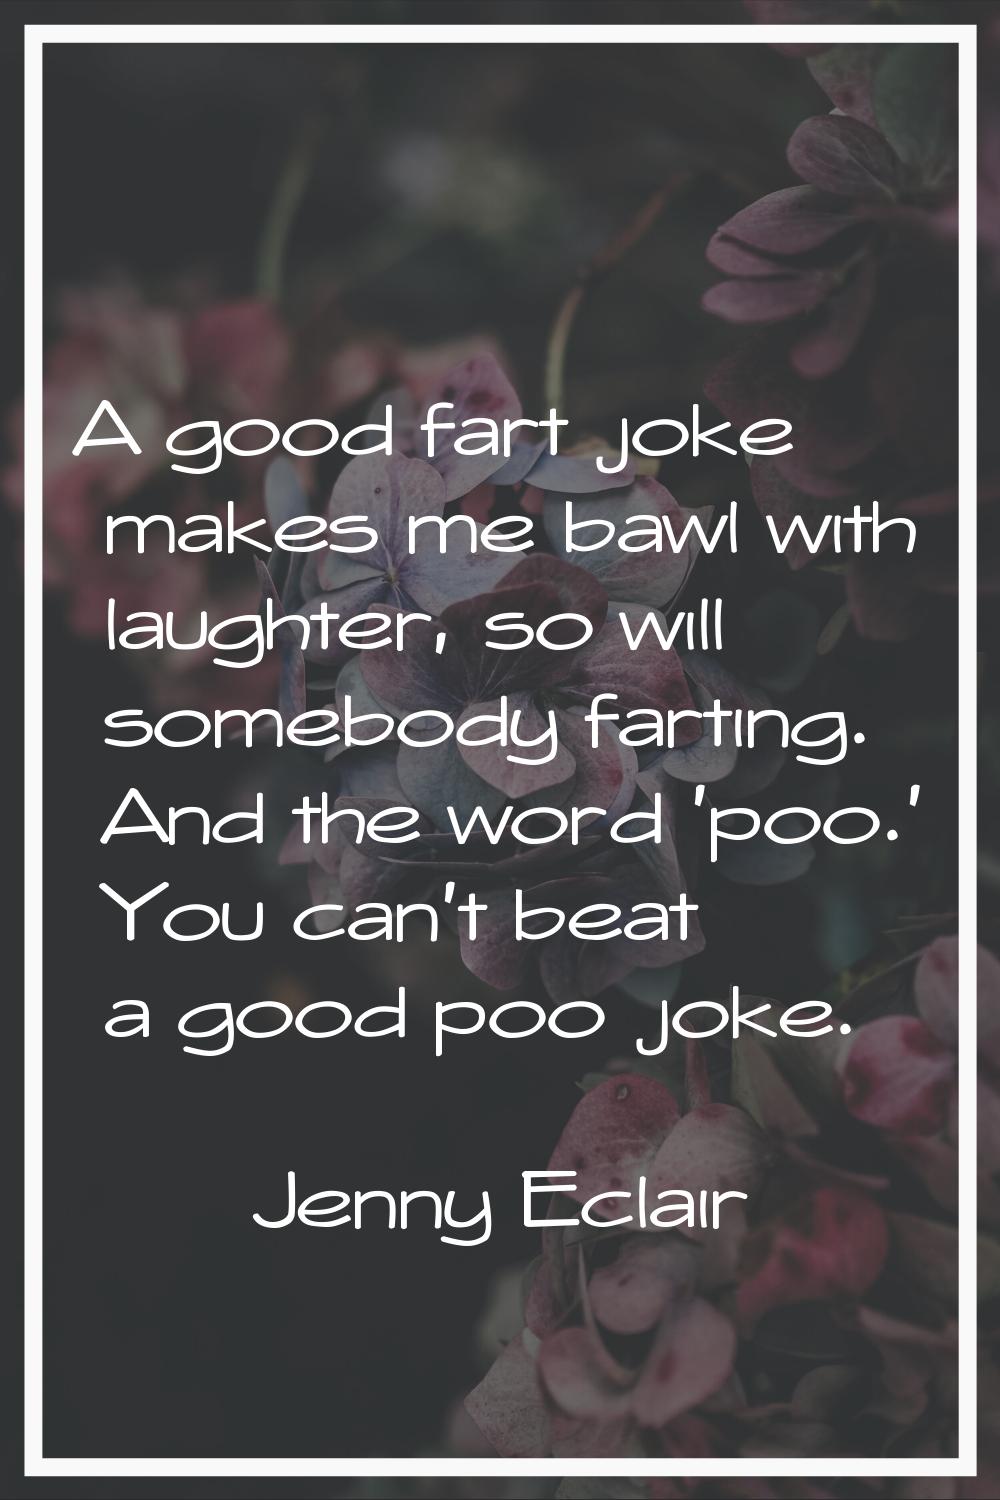 A good fart joke makes me bawl with laughter, so will somebody farting. And the word 'poo.' You can